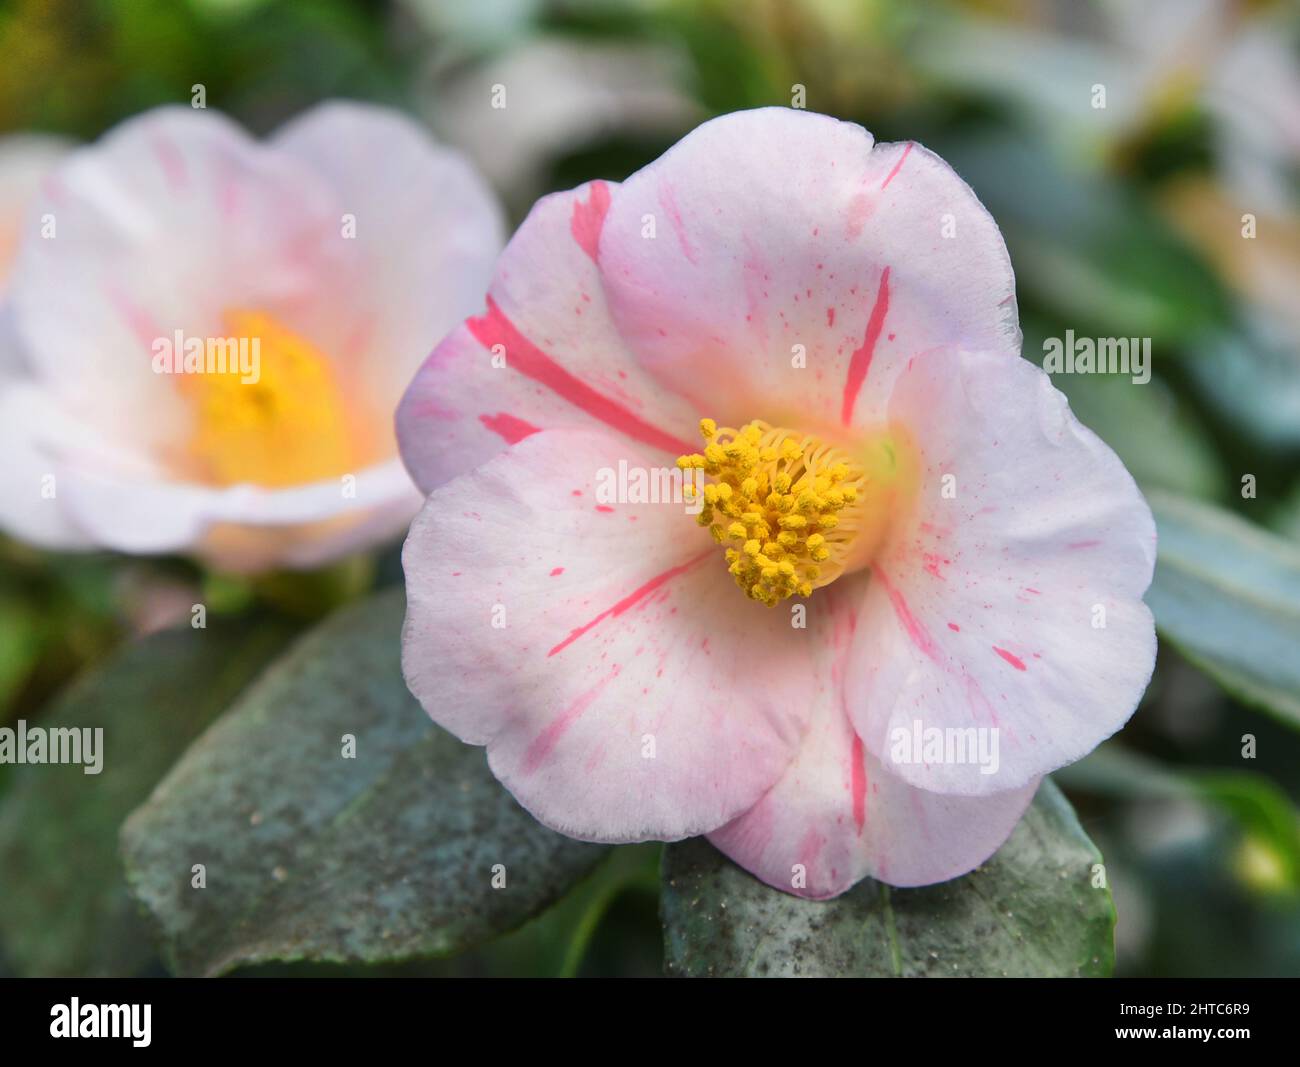 27 February 2022, Saxony, Roßwein: In the camellia house, which is looked after by members of the Heimatverein Roßwein e.V., the camellia 'Camellia japonica Tricolor' shows its pink-white flowers. Currently, the greenhouse also features the white blooms of the camellia 'Alba plena', which is over 200 years old. The 6.50-meter-high plant, also known as the Tea Rose of Winter with its double flowers up to 10 centimeters in size, is said to have been planted in the 18th century by Count von Einsiedel at Gersdorf near Roßwein. The botanical rarity is the second oldest north of the Alps in Europe a Stock Photo